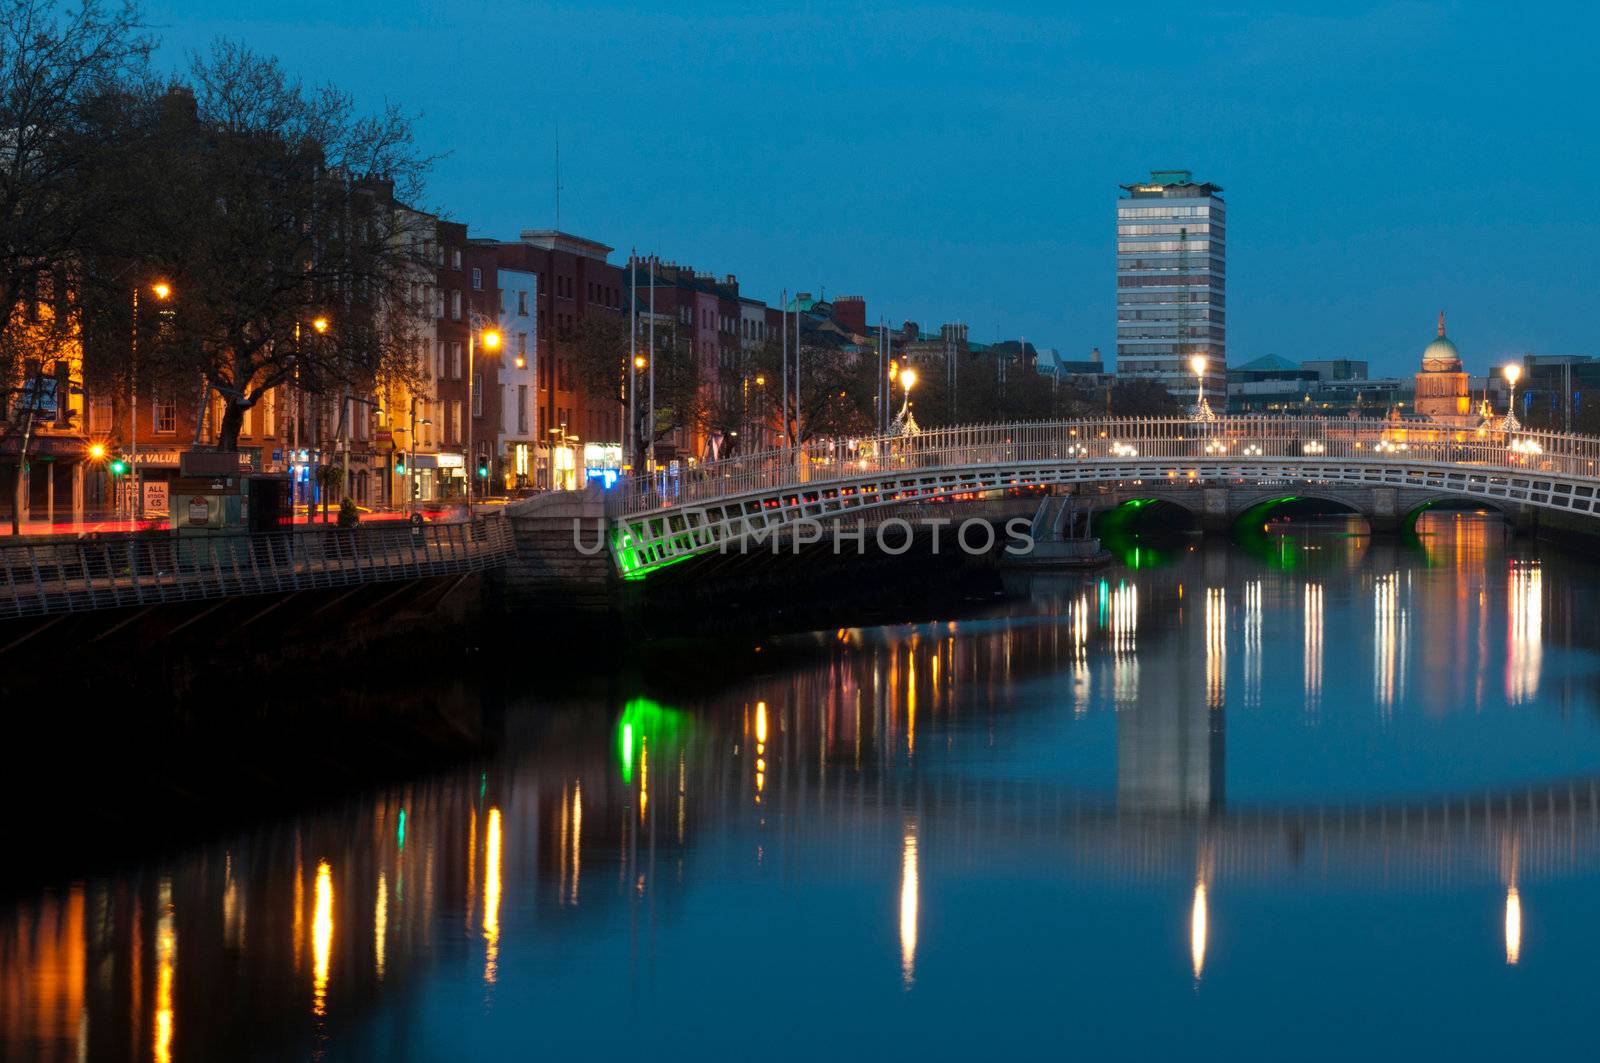 Dublin at night by luissantos84